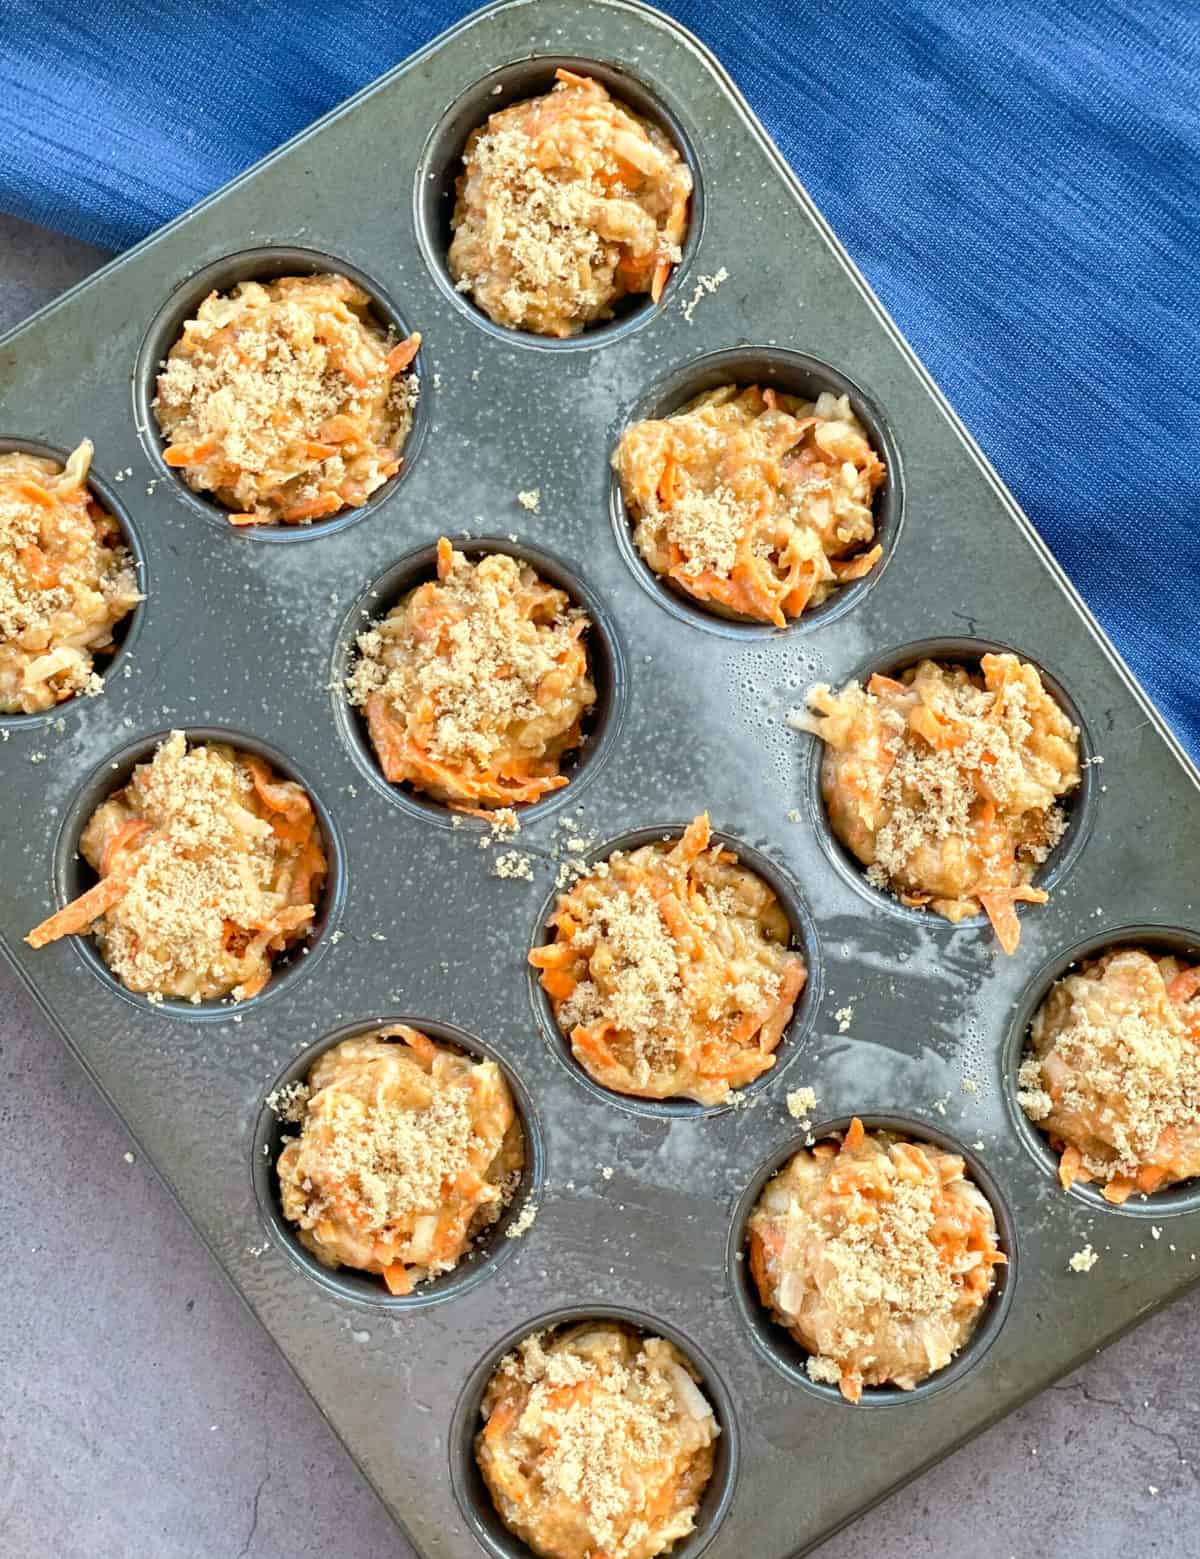 Brown sugar sprinkled on top of apple and carrot muffins before baking 